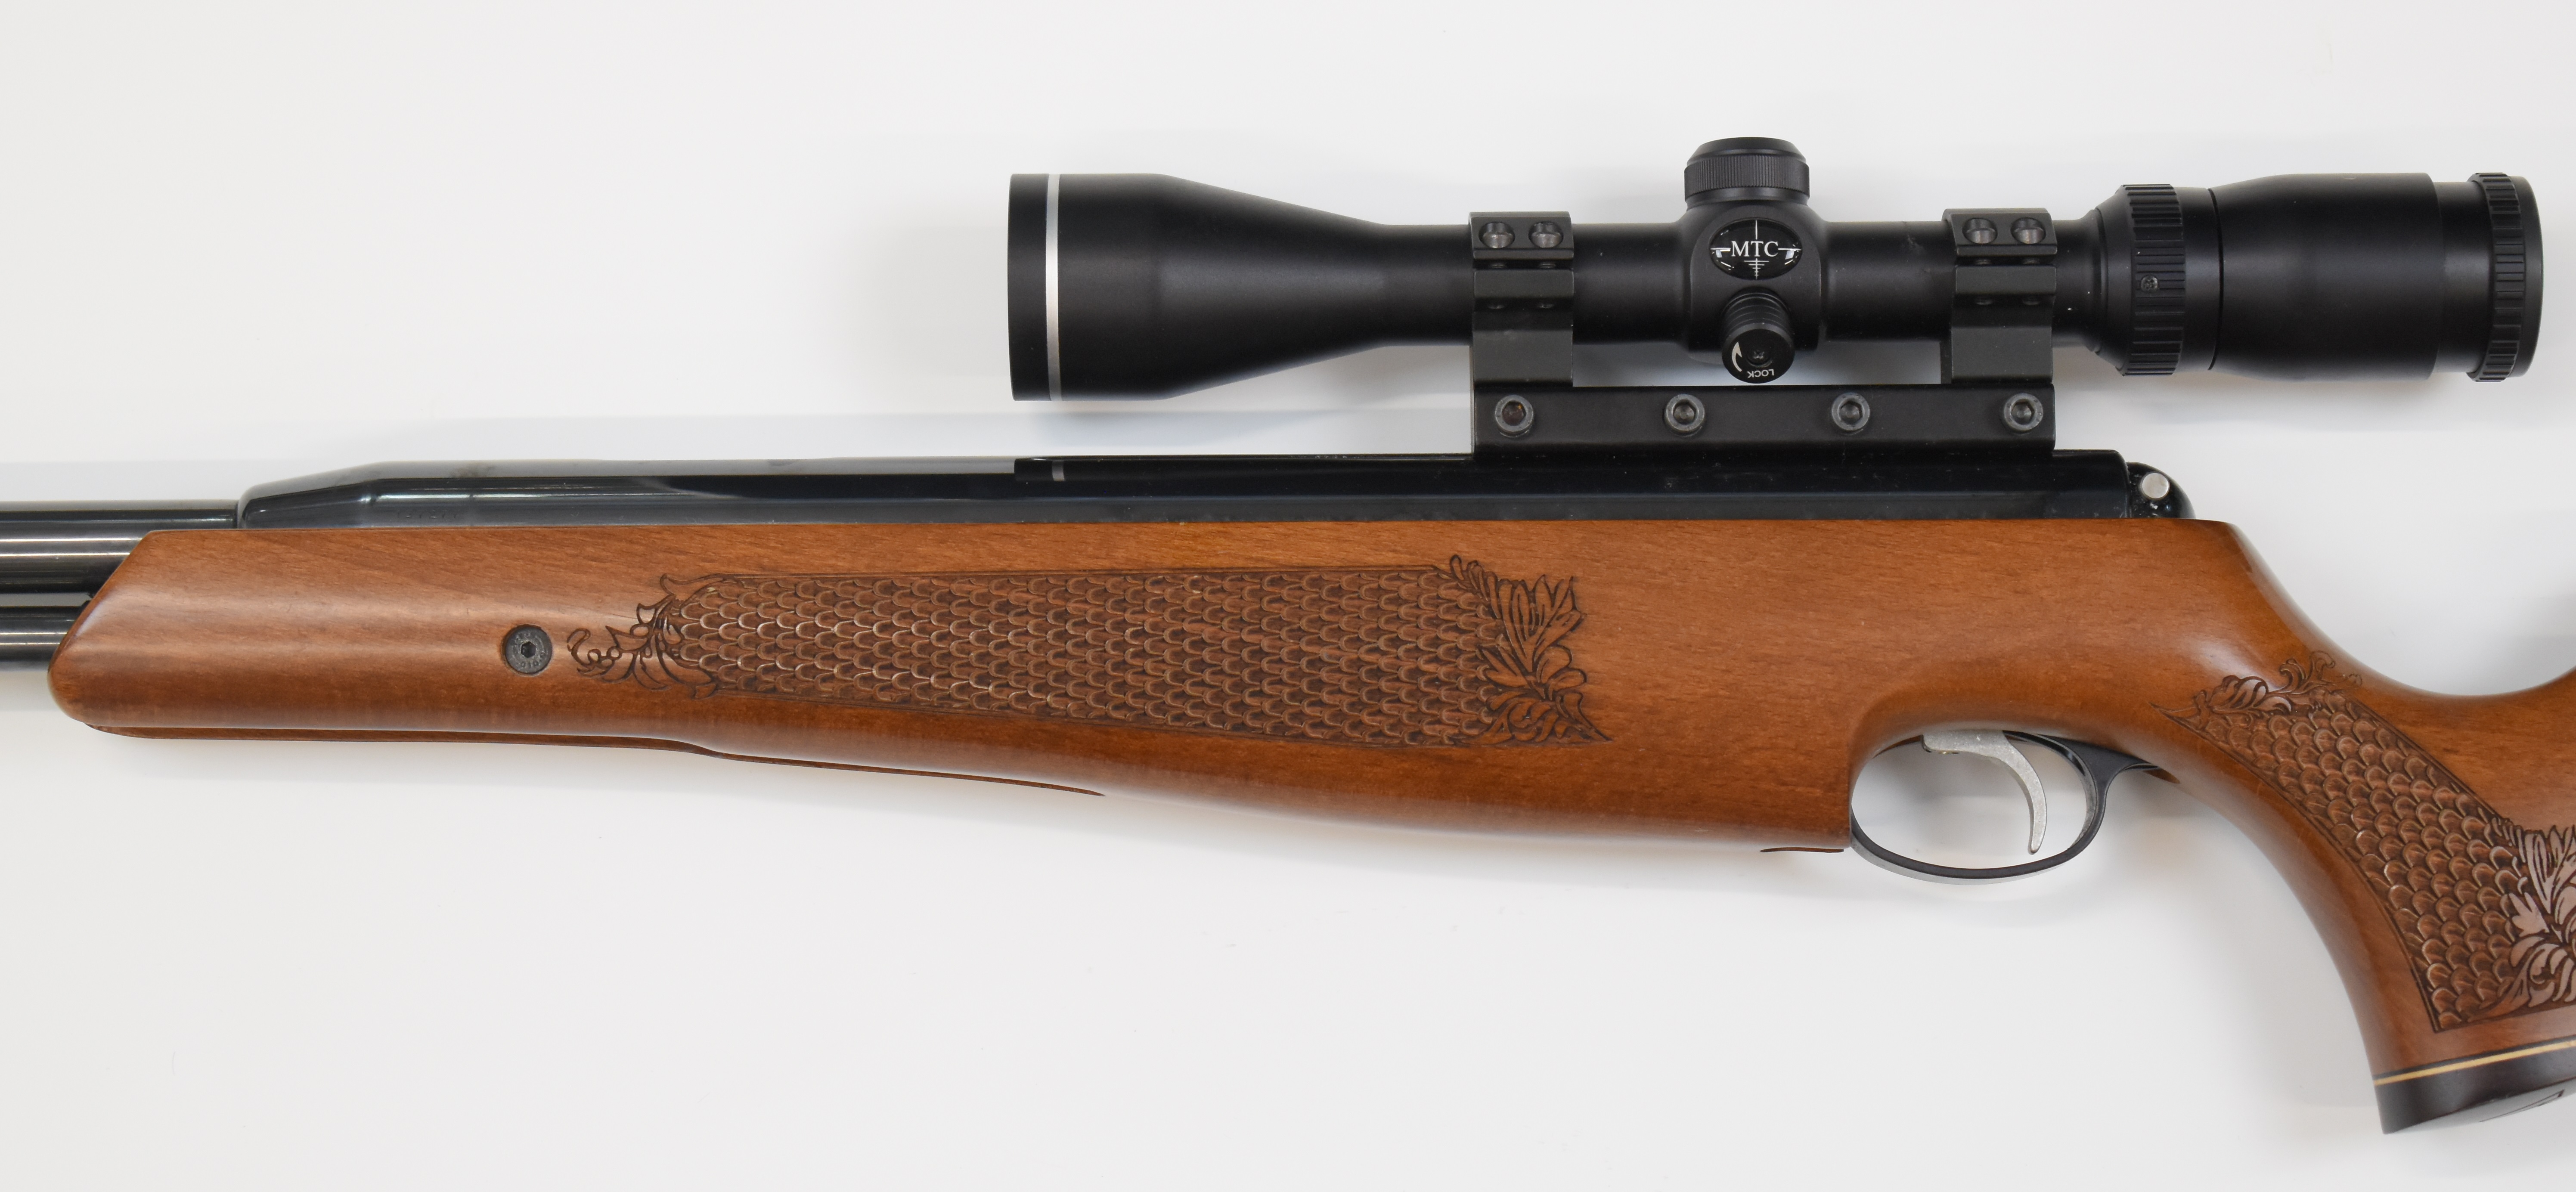 Air Arms TX200 .22 under-lever air rifle with carved semi-pistol grip and forend, adjustable - Image 9 of 11